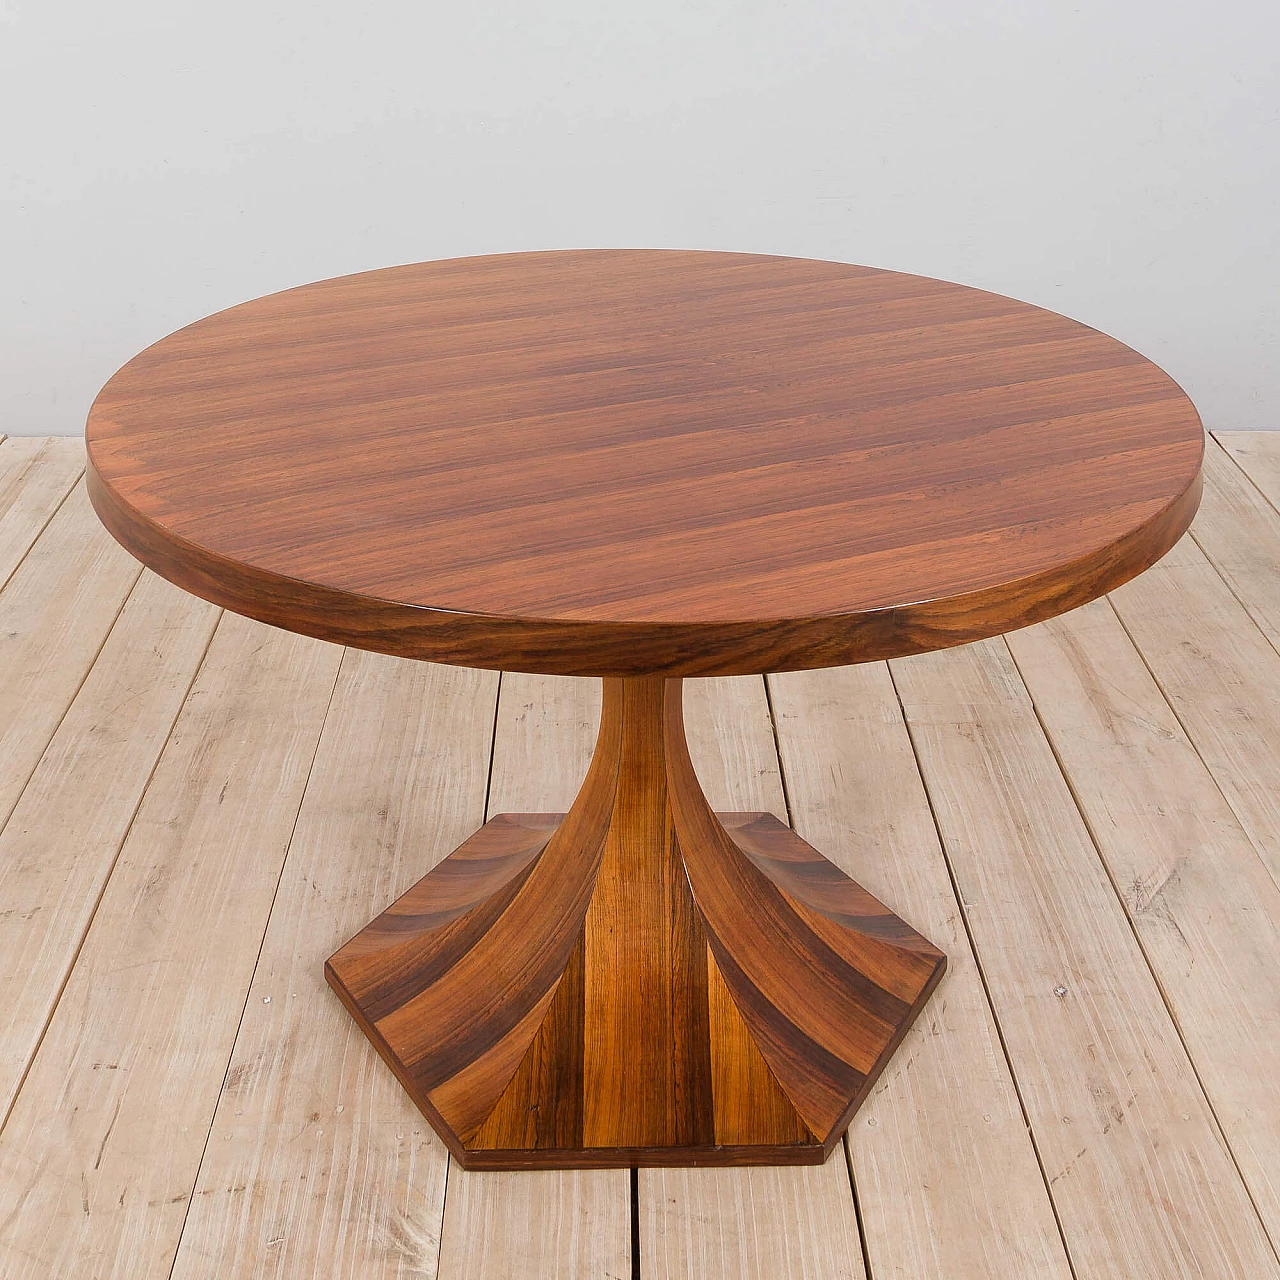 Clessidra round rosewood table by Carlo De Carli, 1960s 1365022